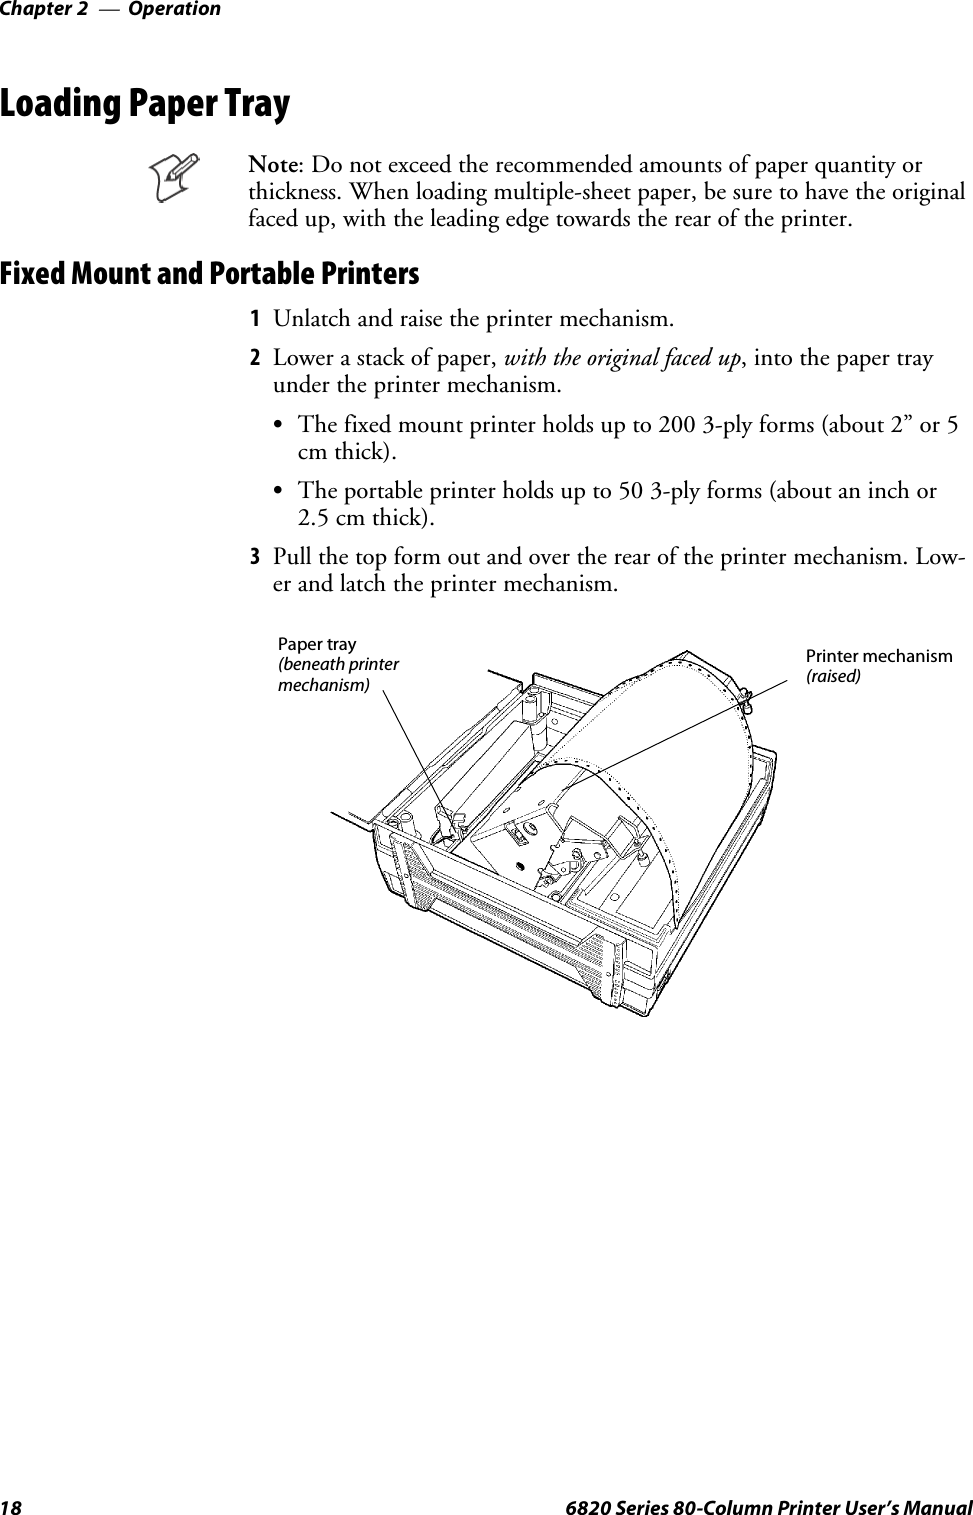 OperationChapter —218 6820 Series 80-Column Printer User’s ManualLoading Paper TrayNote: Do not exceed the recommended amounts of paper quantity orthickness. When loading multiple-sheet paper, be sure to have the originalfaced up, with the leading edge towards the rear of the printer.FixedMountandPortablePrinters1Unlatch and raise the printer mechanism.2Lower a stack of paper, with the original faced up, into the paper trayundertheprintermechanism.SThe fixed mount printer holds up to 200 3-ply forms (about 2” or 5cm thick).STheportableprinterholdsupto503-plyforms(aboutaninchor2.5 cm thick).3Pull the top form out and over the rear of the printer mechanism. Low-er and latch the printer mechanism.Printer mechanism(raised)Paper tray(beneath printermechanism)